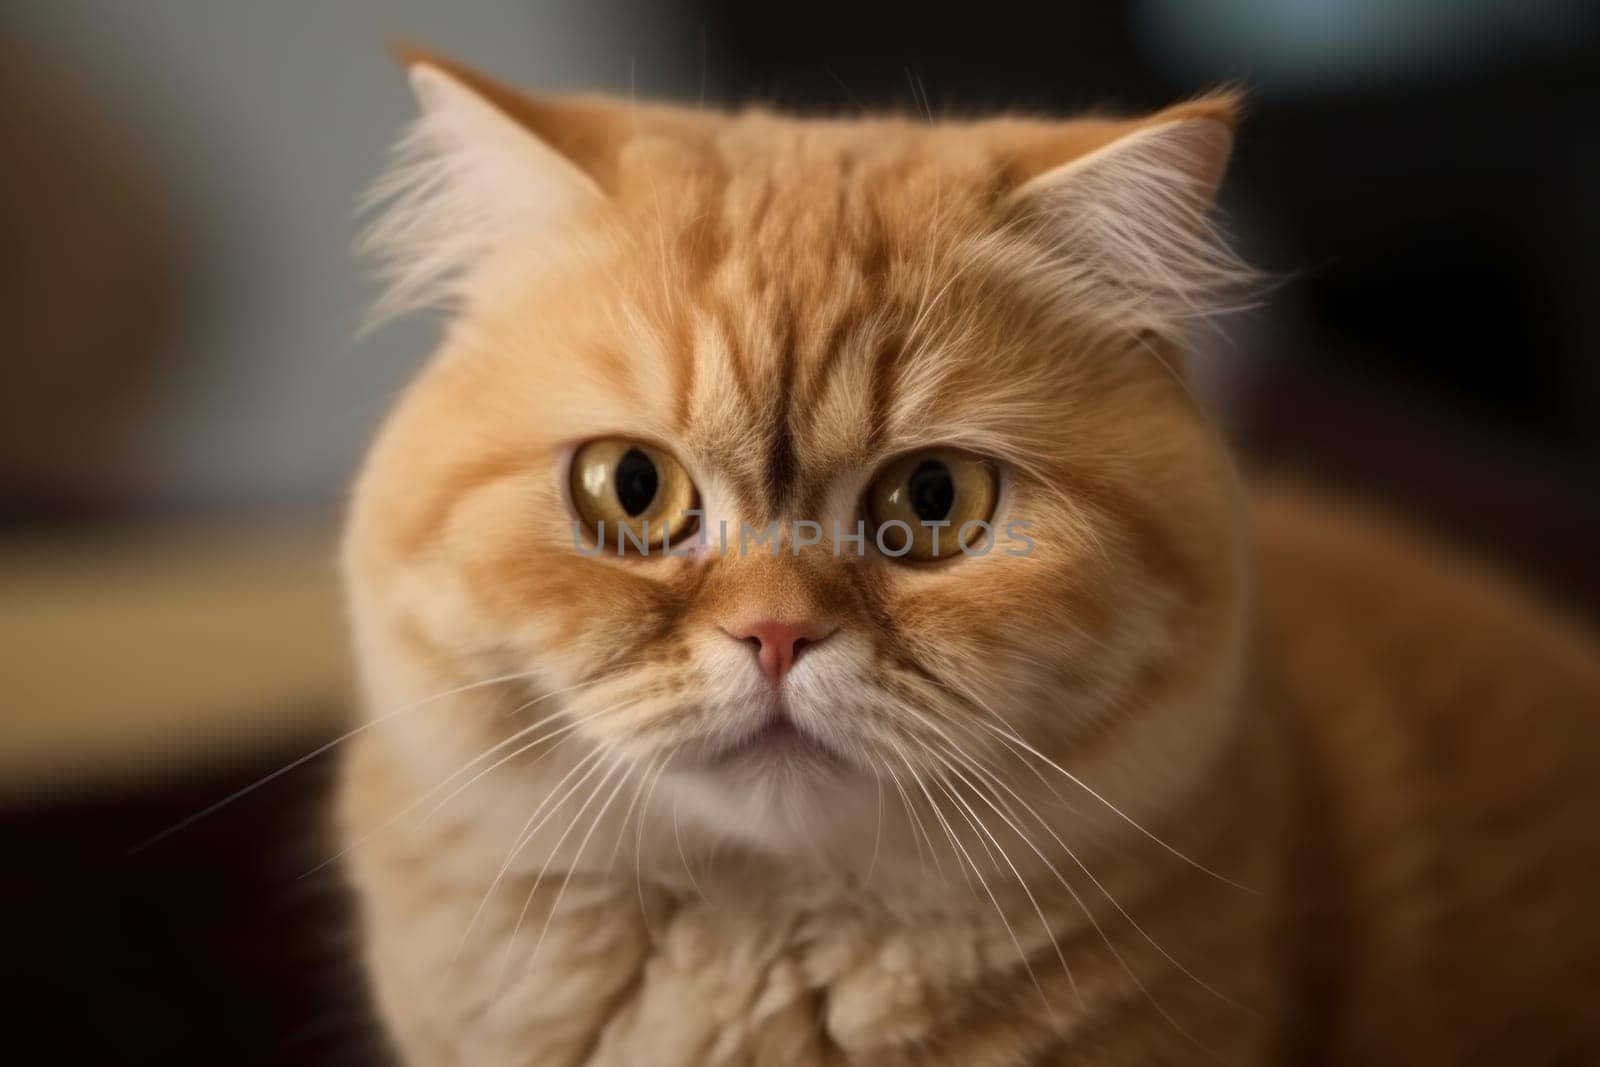 Portrait of a cute cat looking away. Highland fold cat breed